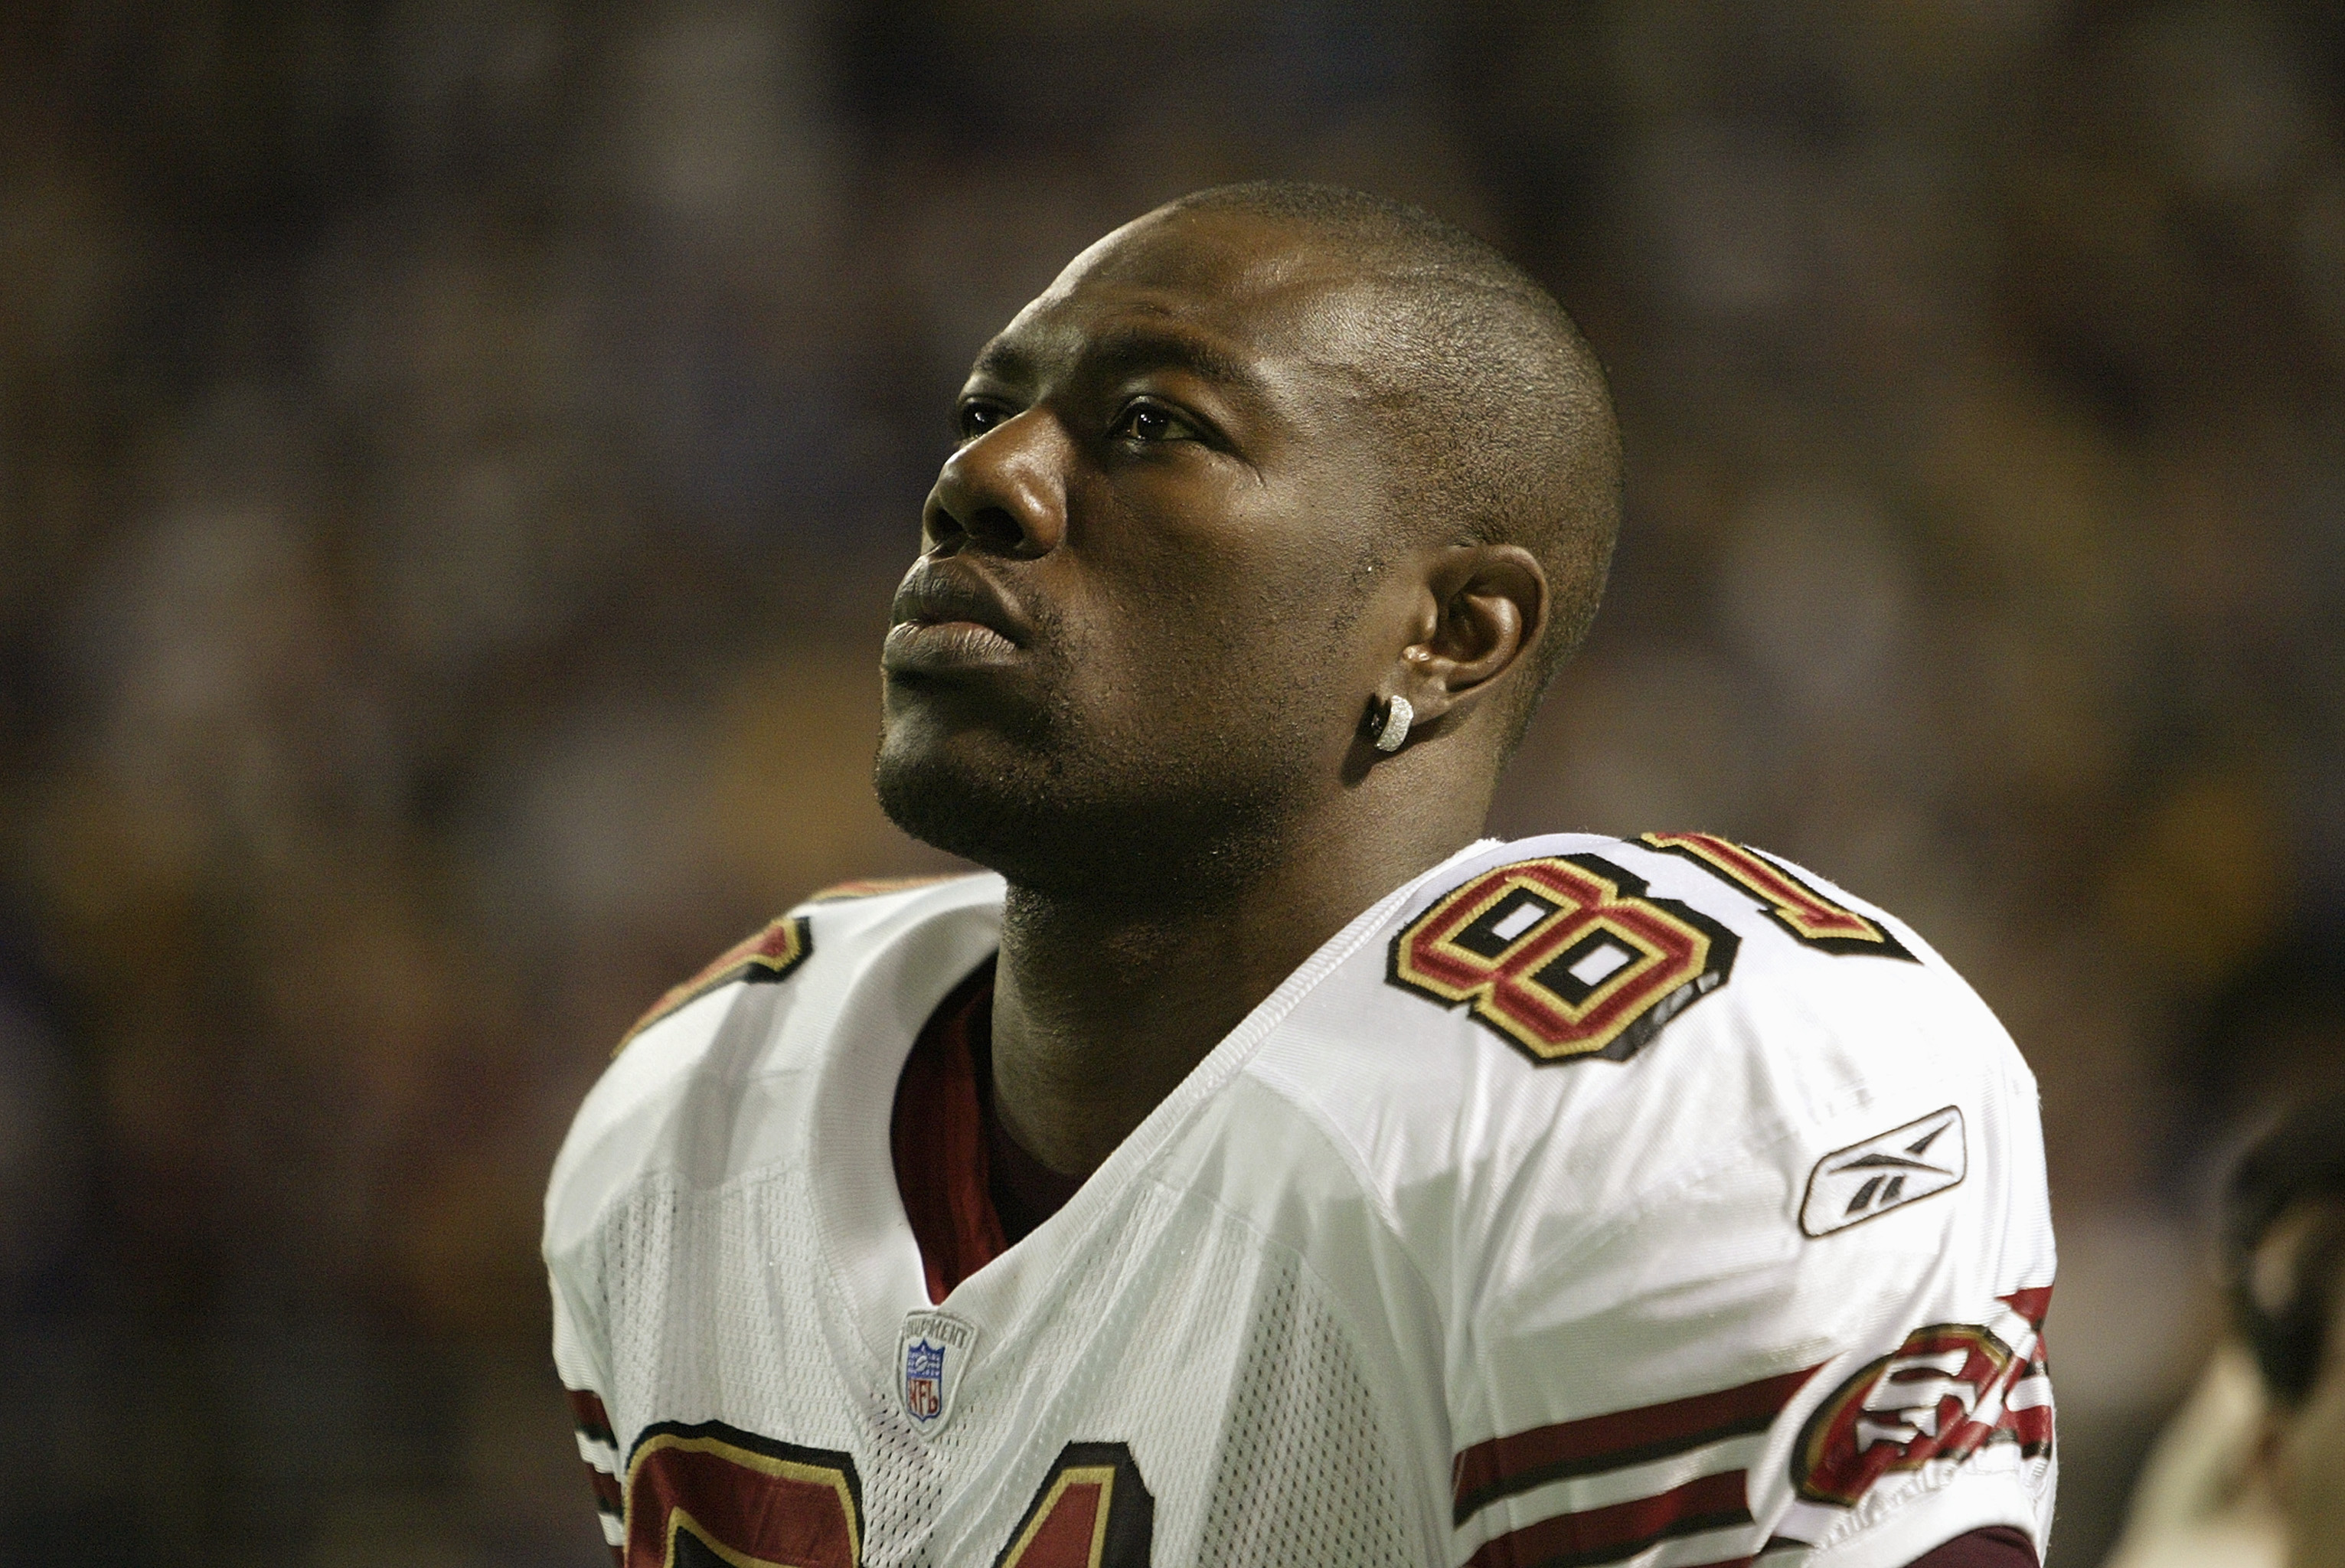 MINNEAPOLIS - SEPTEMBER 28:  Wide receiver Terrell Owens #81 of the San Francisco 49ers stands on the sidelines during the game agains the Minnesota Vikings at the Hubert H. Humphrey Metrodome on September 28, 2003 in Minneapolis, Minnesota. The Vikings d